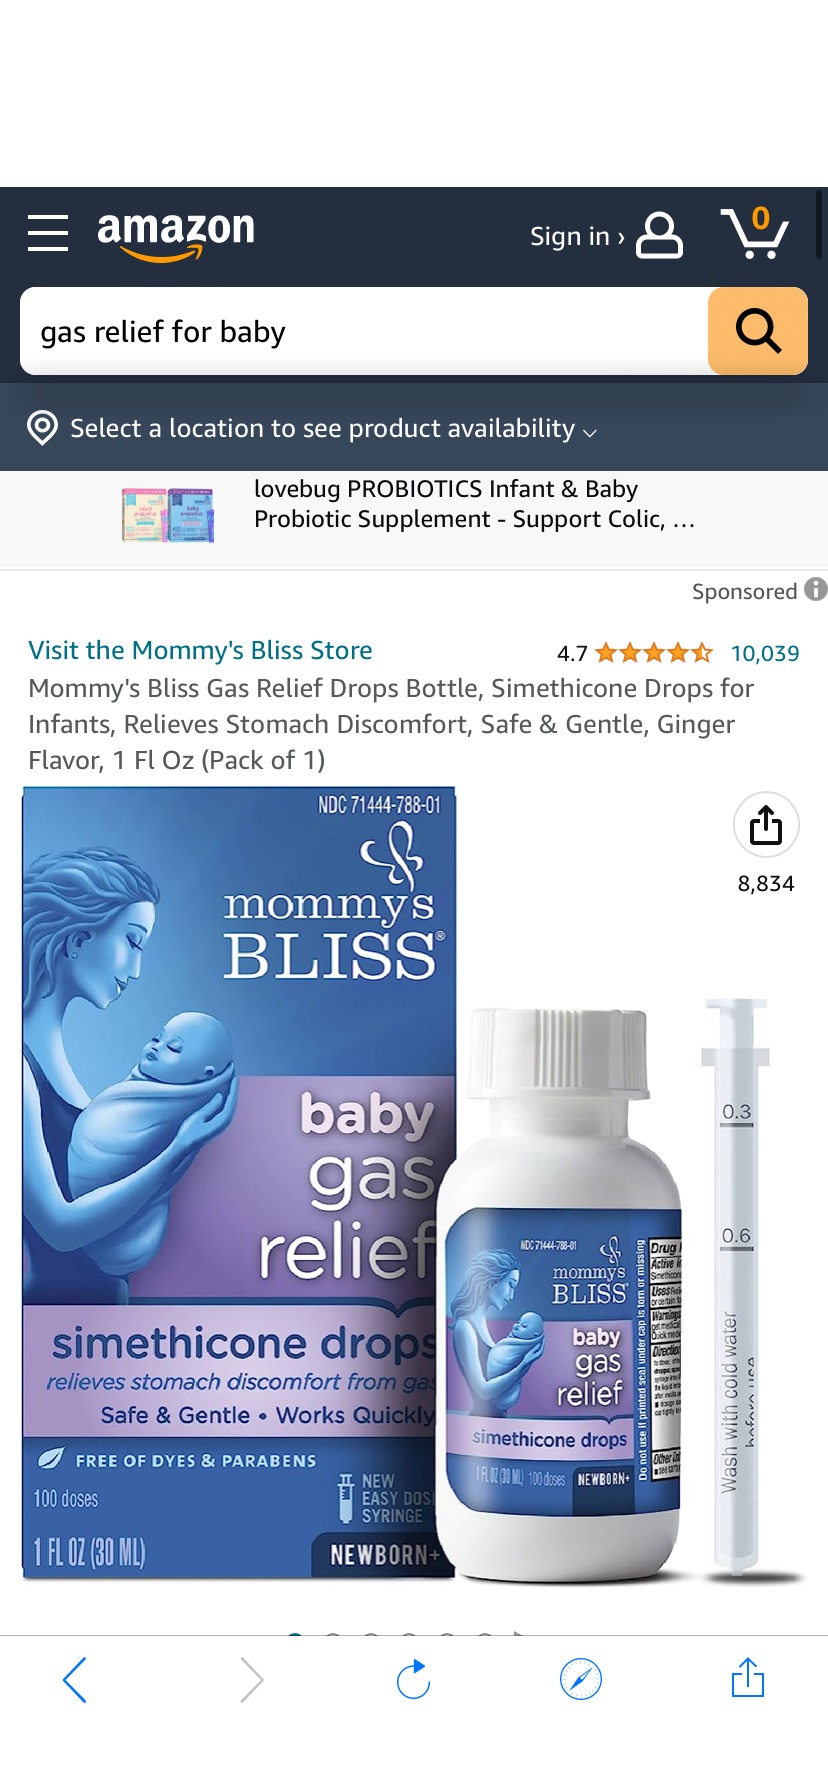 Amazon.com: Mommy's Bliss 婴幼儿胀气缓解Gas Relief Drops Bottle, Simethicone Drops for Infants, Relieves Stomach Discomfort, Safe & Gentle, Ginger Flavor, 1 Fl Oz (Pack of 1) : Health & Household